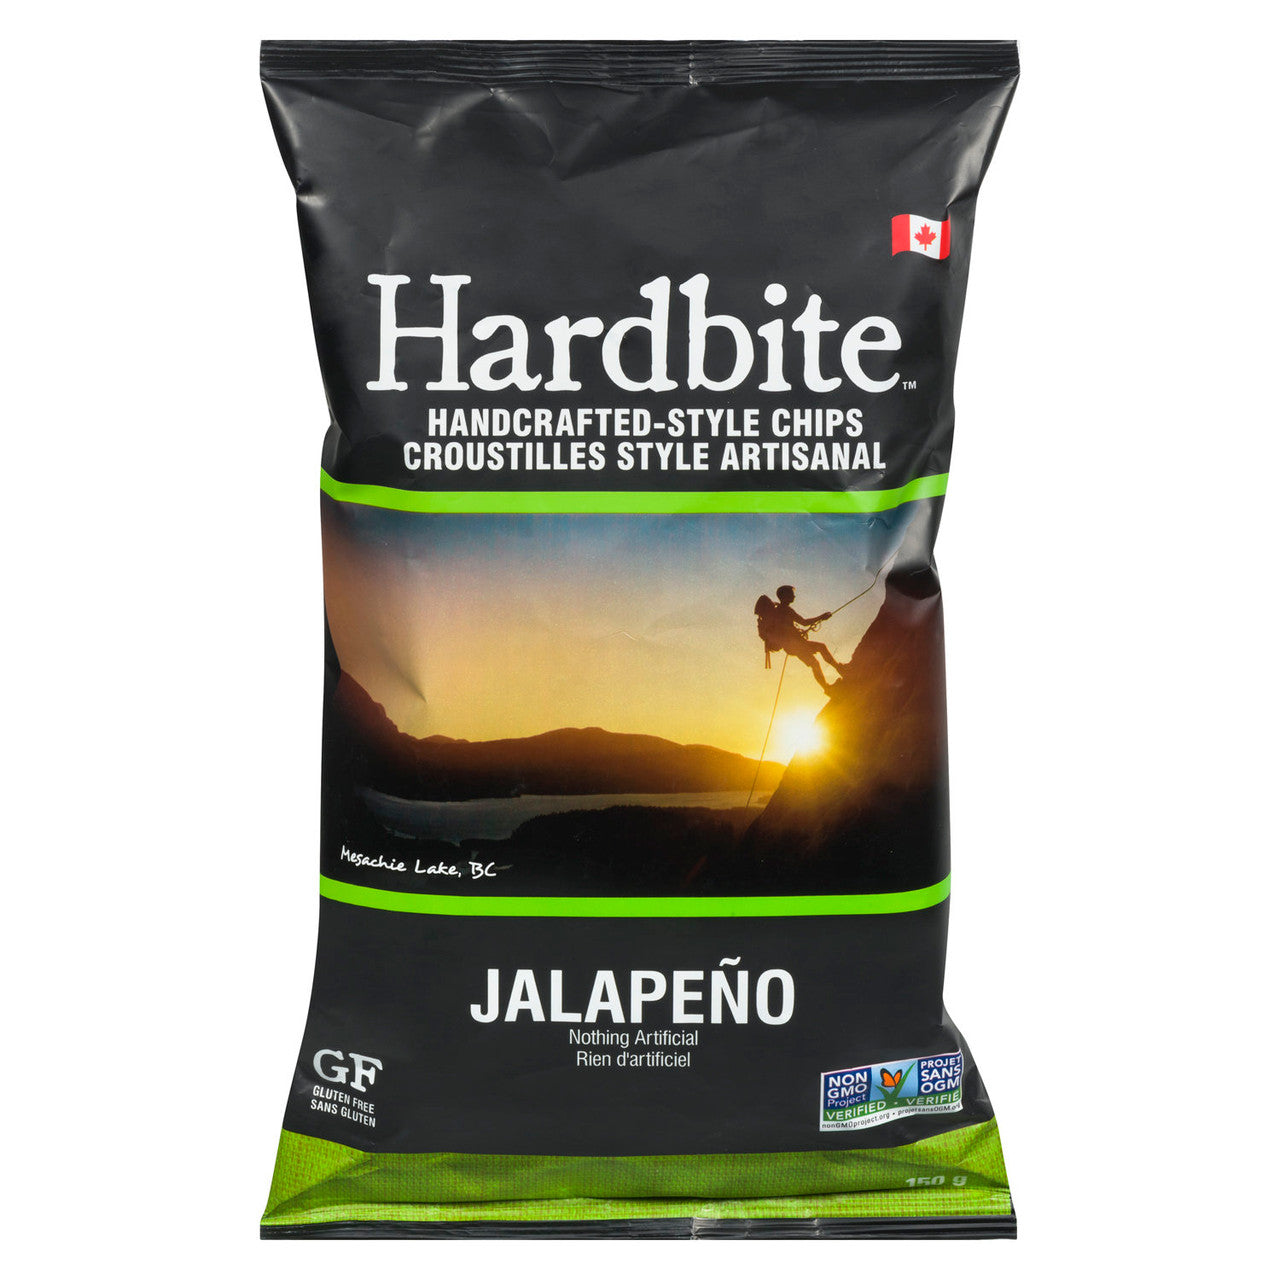 Hardbite Jalapeno Natural Potato Chips, 150g/5.3oz., {Imported from Canada}